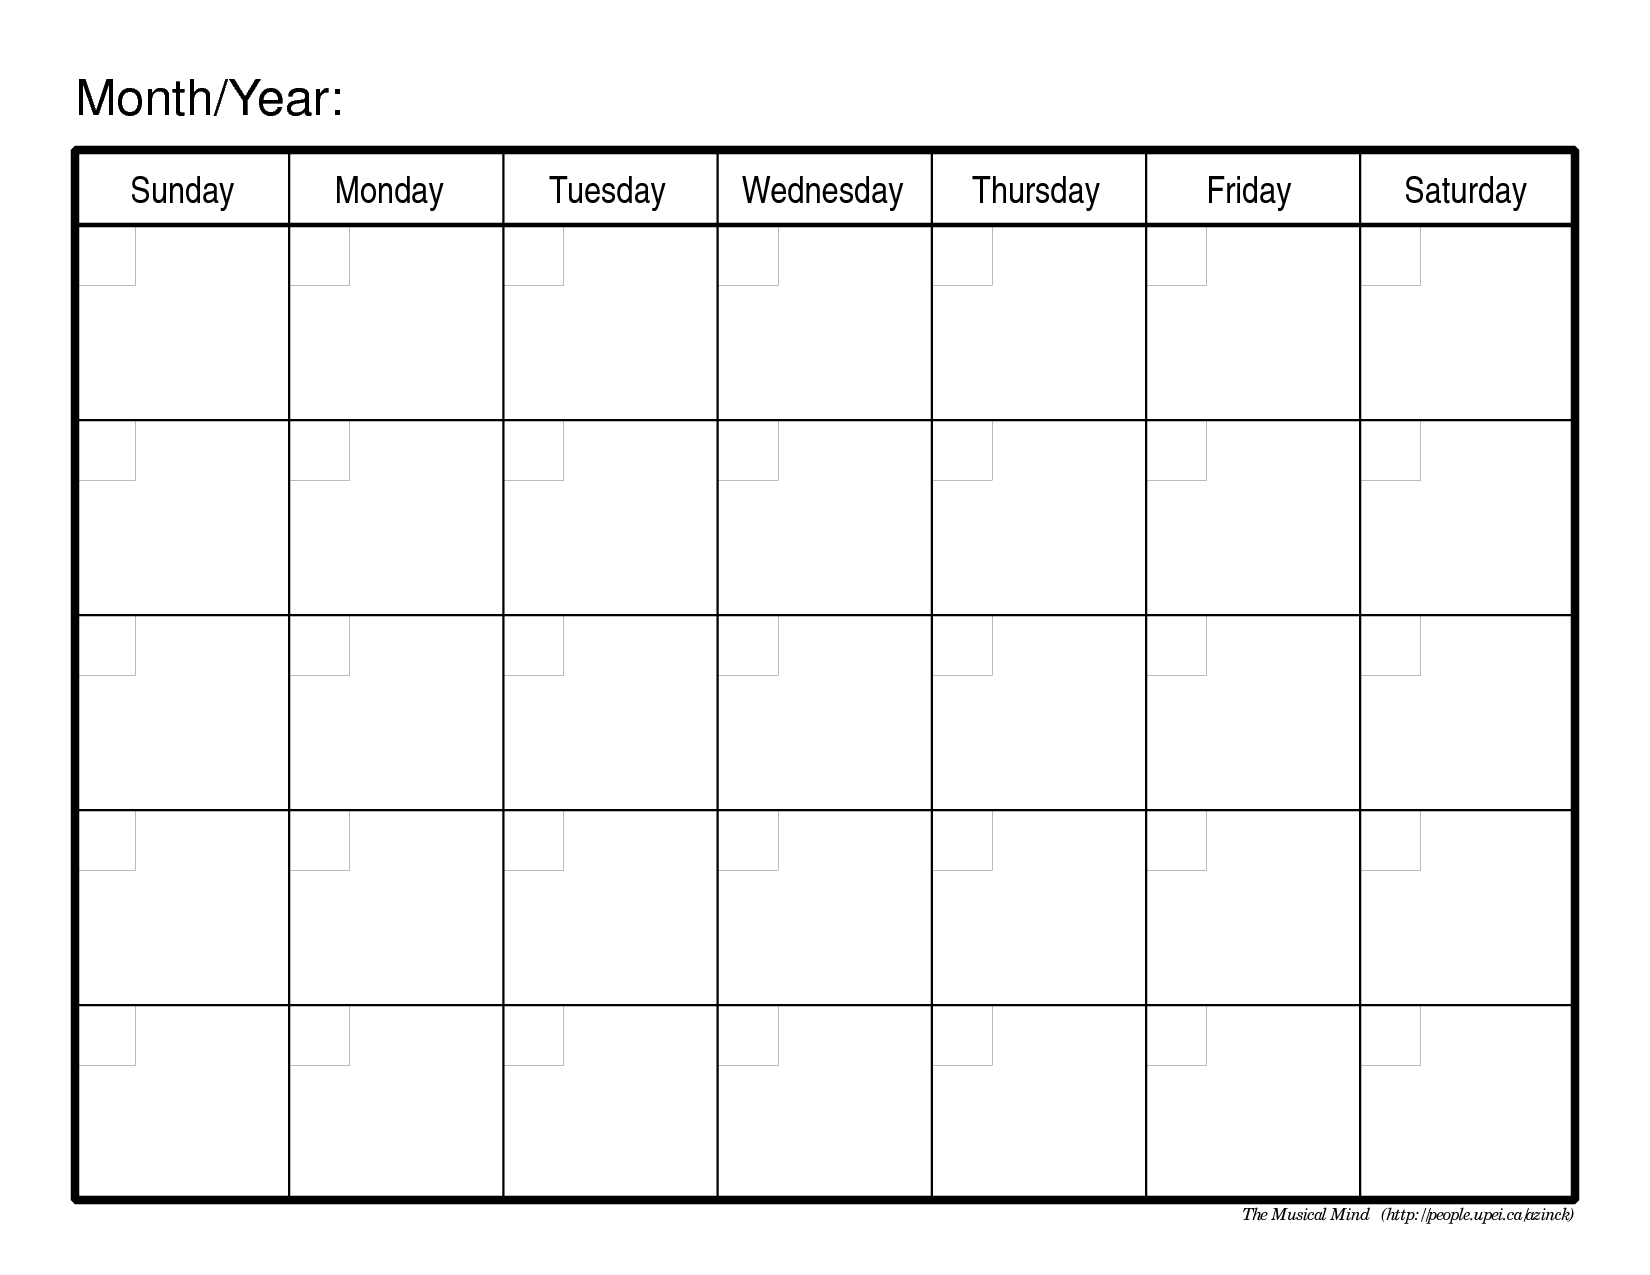 Monthly Calendar Template | Organizing | Pinterest | Monthly 